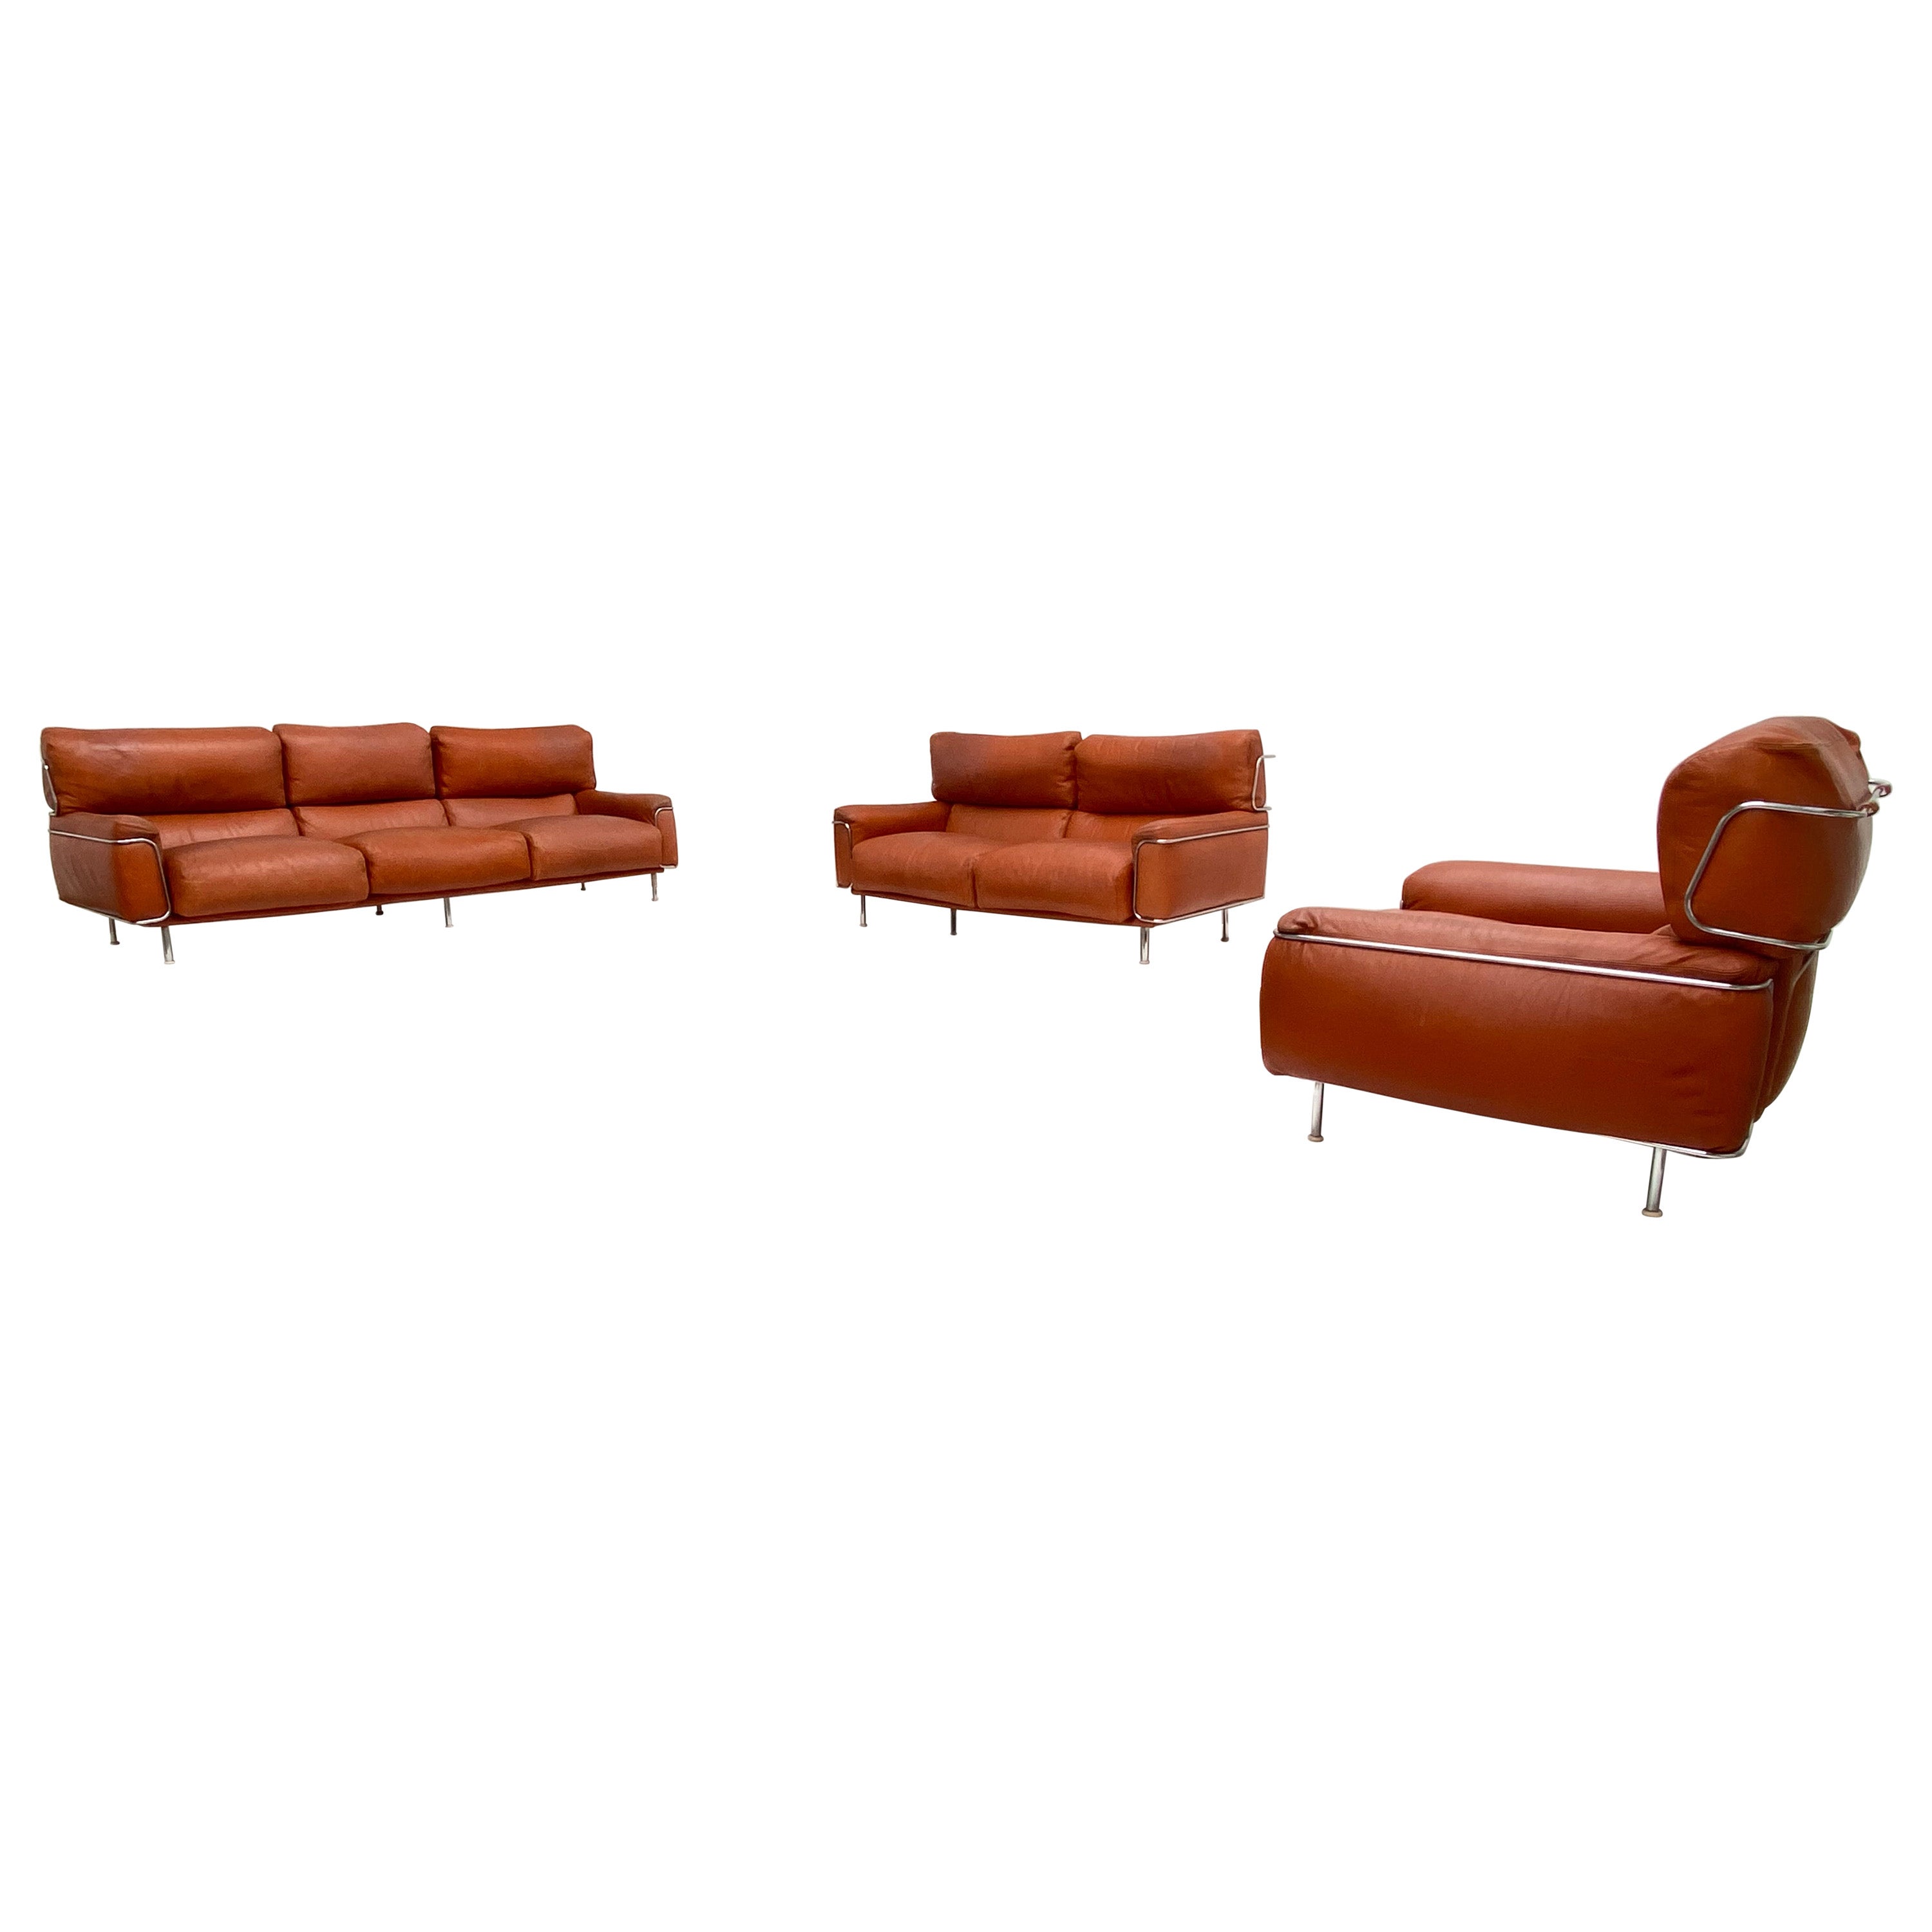 Very Rare Vittorio Introini Leather Sofa Set by Saporiti, Italy, 1968 Published For Sale